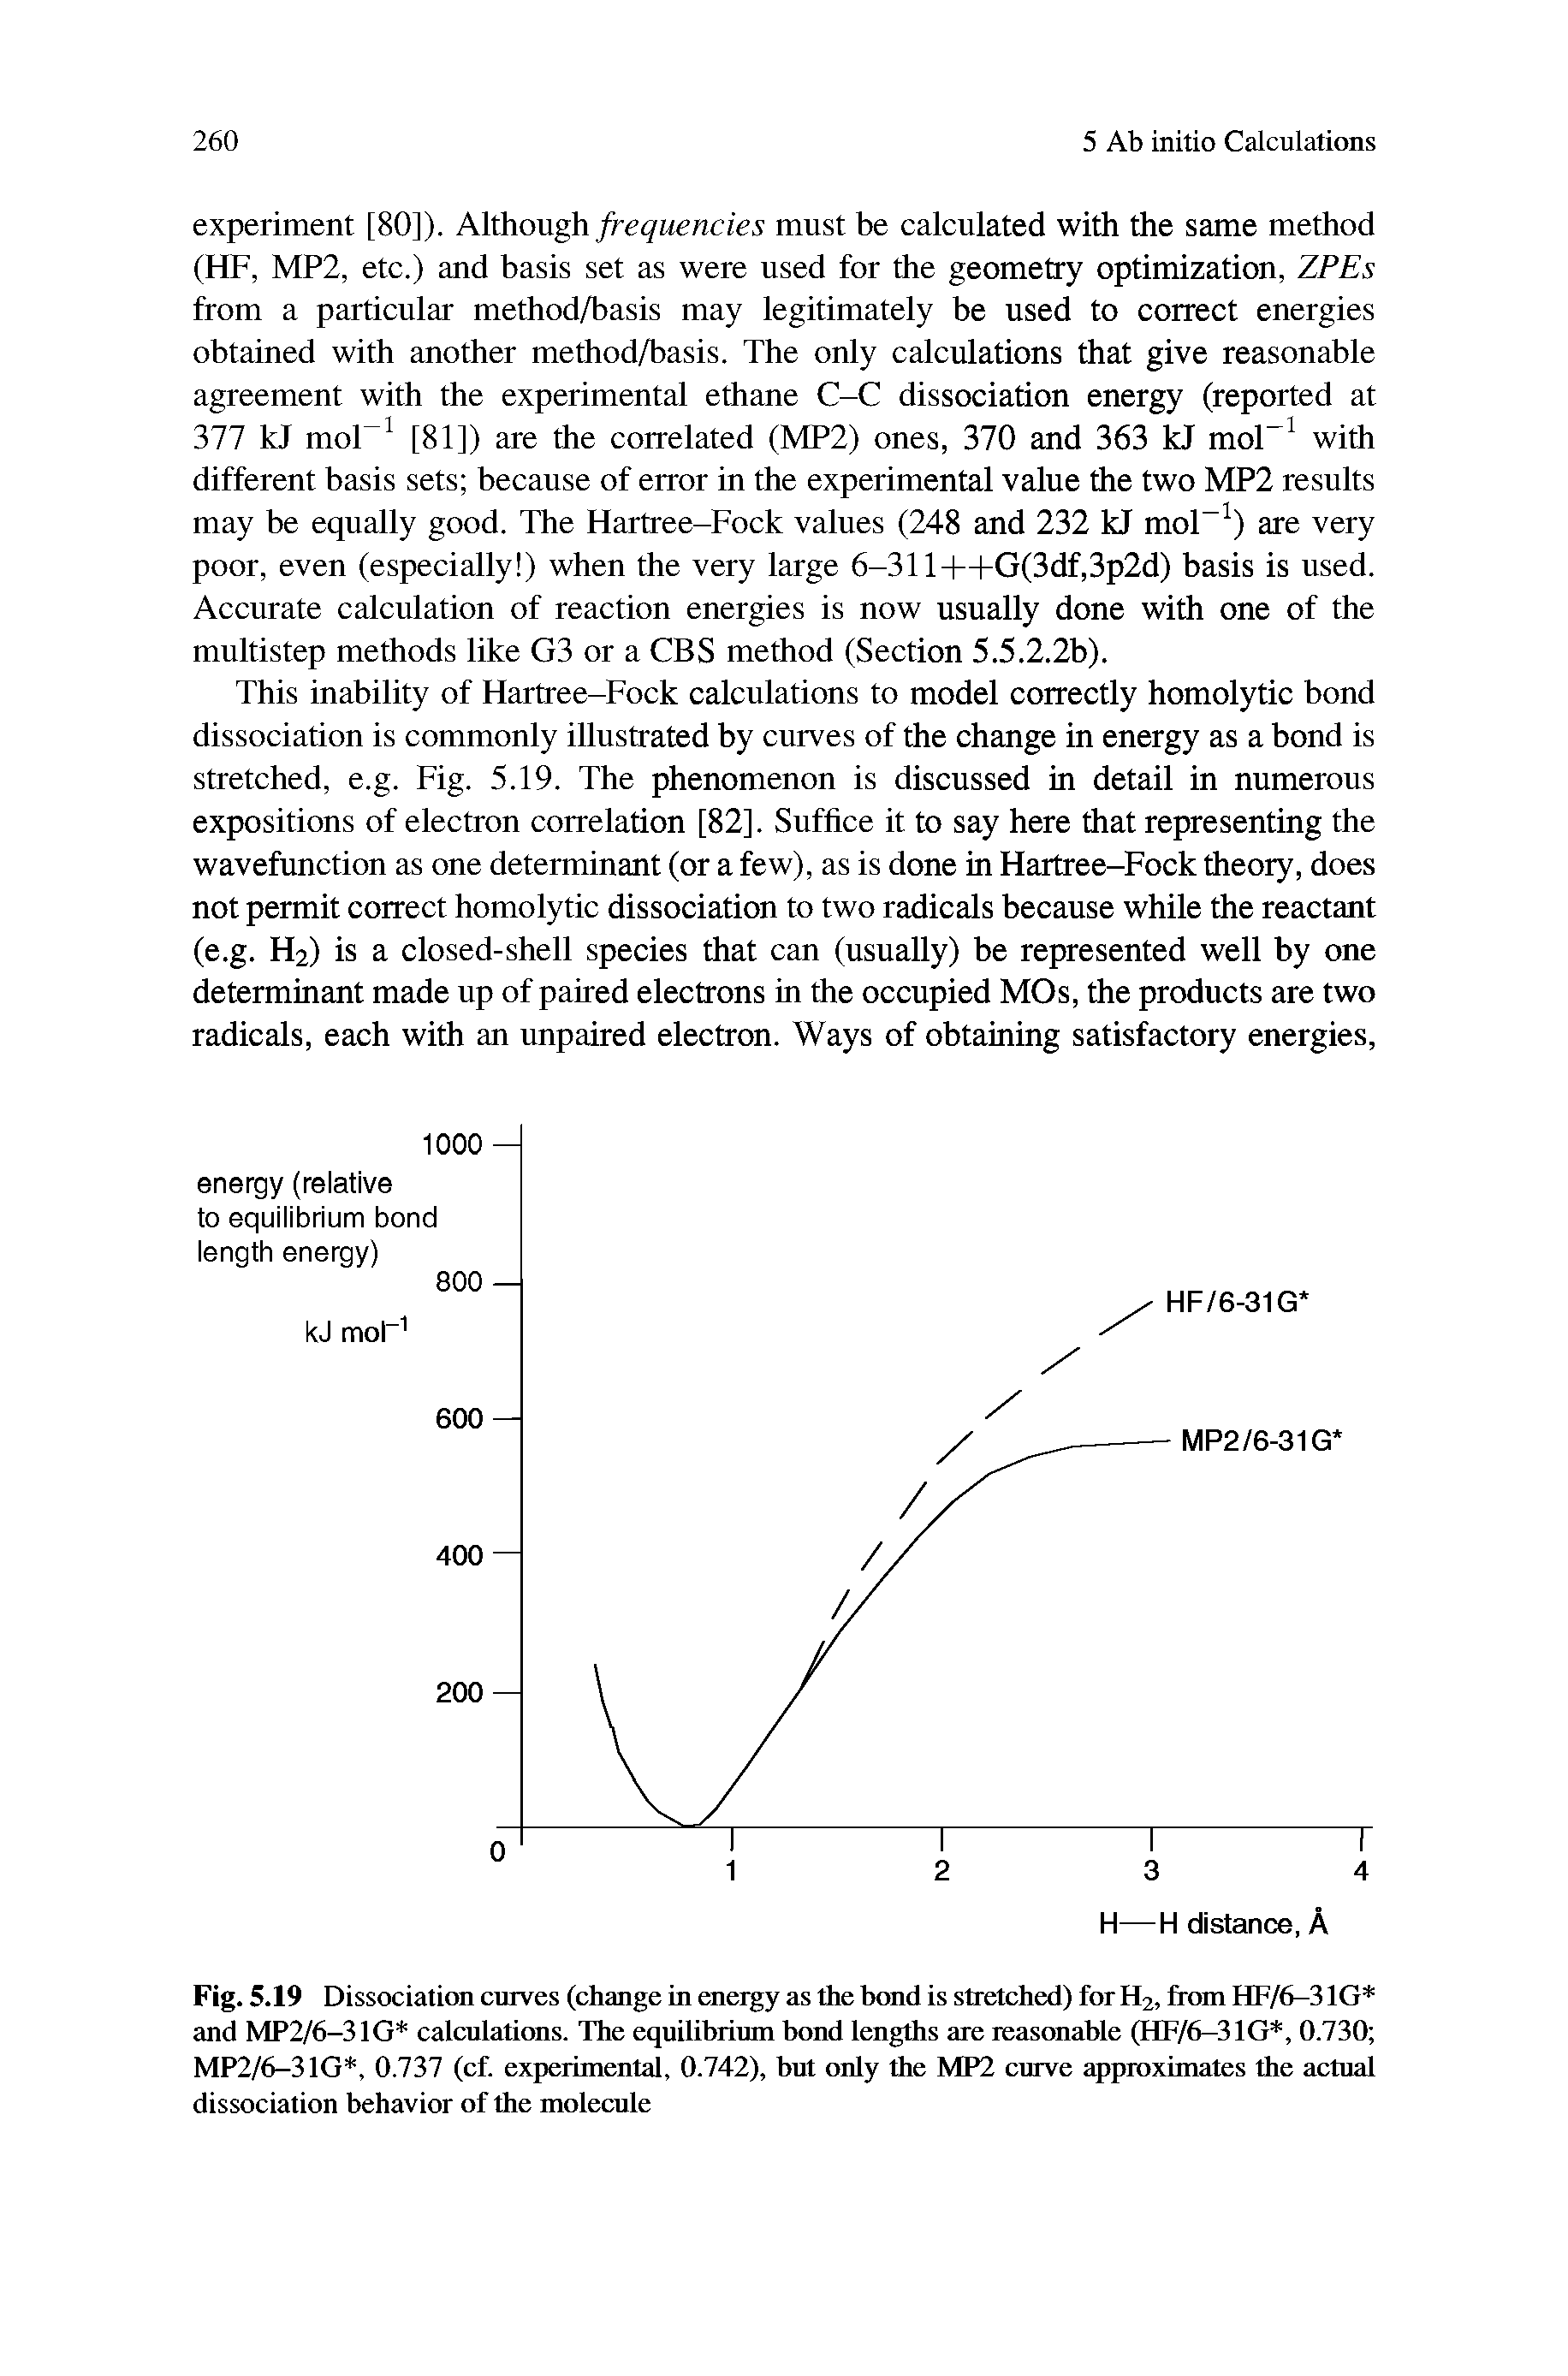 Fig. 5.19 Dissociation curves (change in energy as the bond is stretched) for H2, from HF/6-31G and MP2/6-31G calculations. The equilibrium bond lengths are reasonable (HF/6—31G, 0.730 MP2/6-31G, 0.737 (cf. experimental, 0.742), but only the MP2 curve approximates the actual dissociation behavior of the molecule...